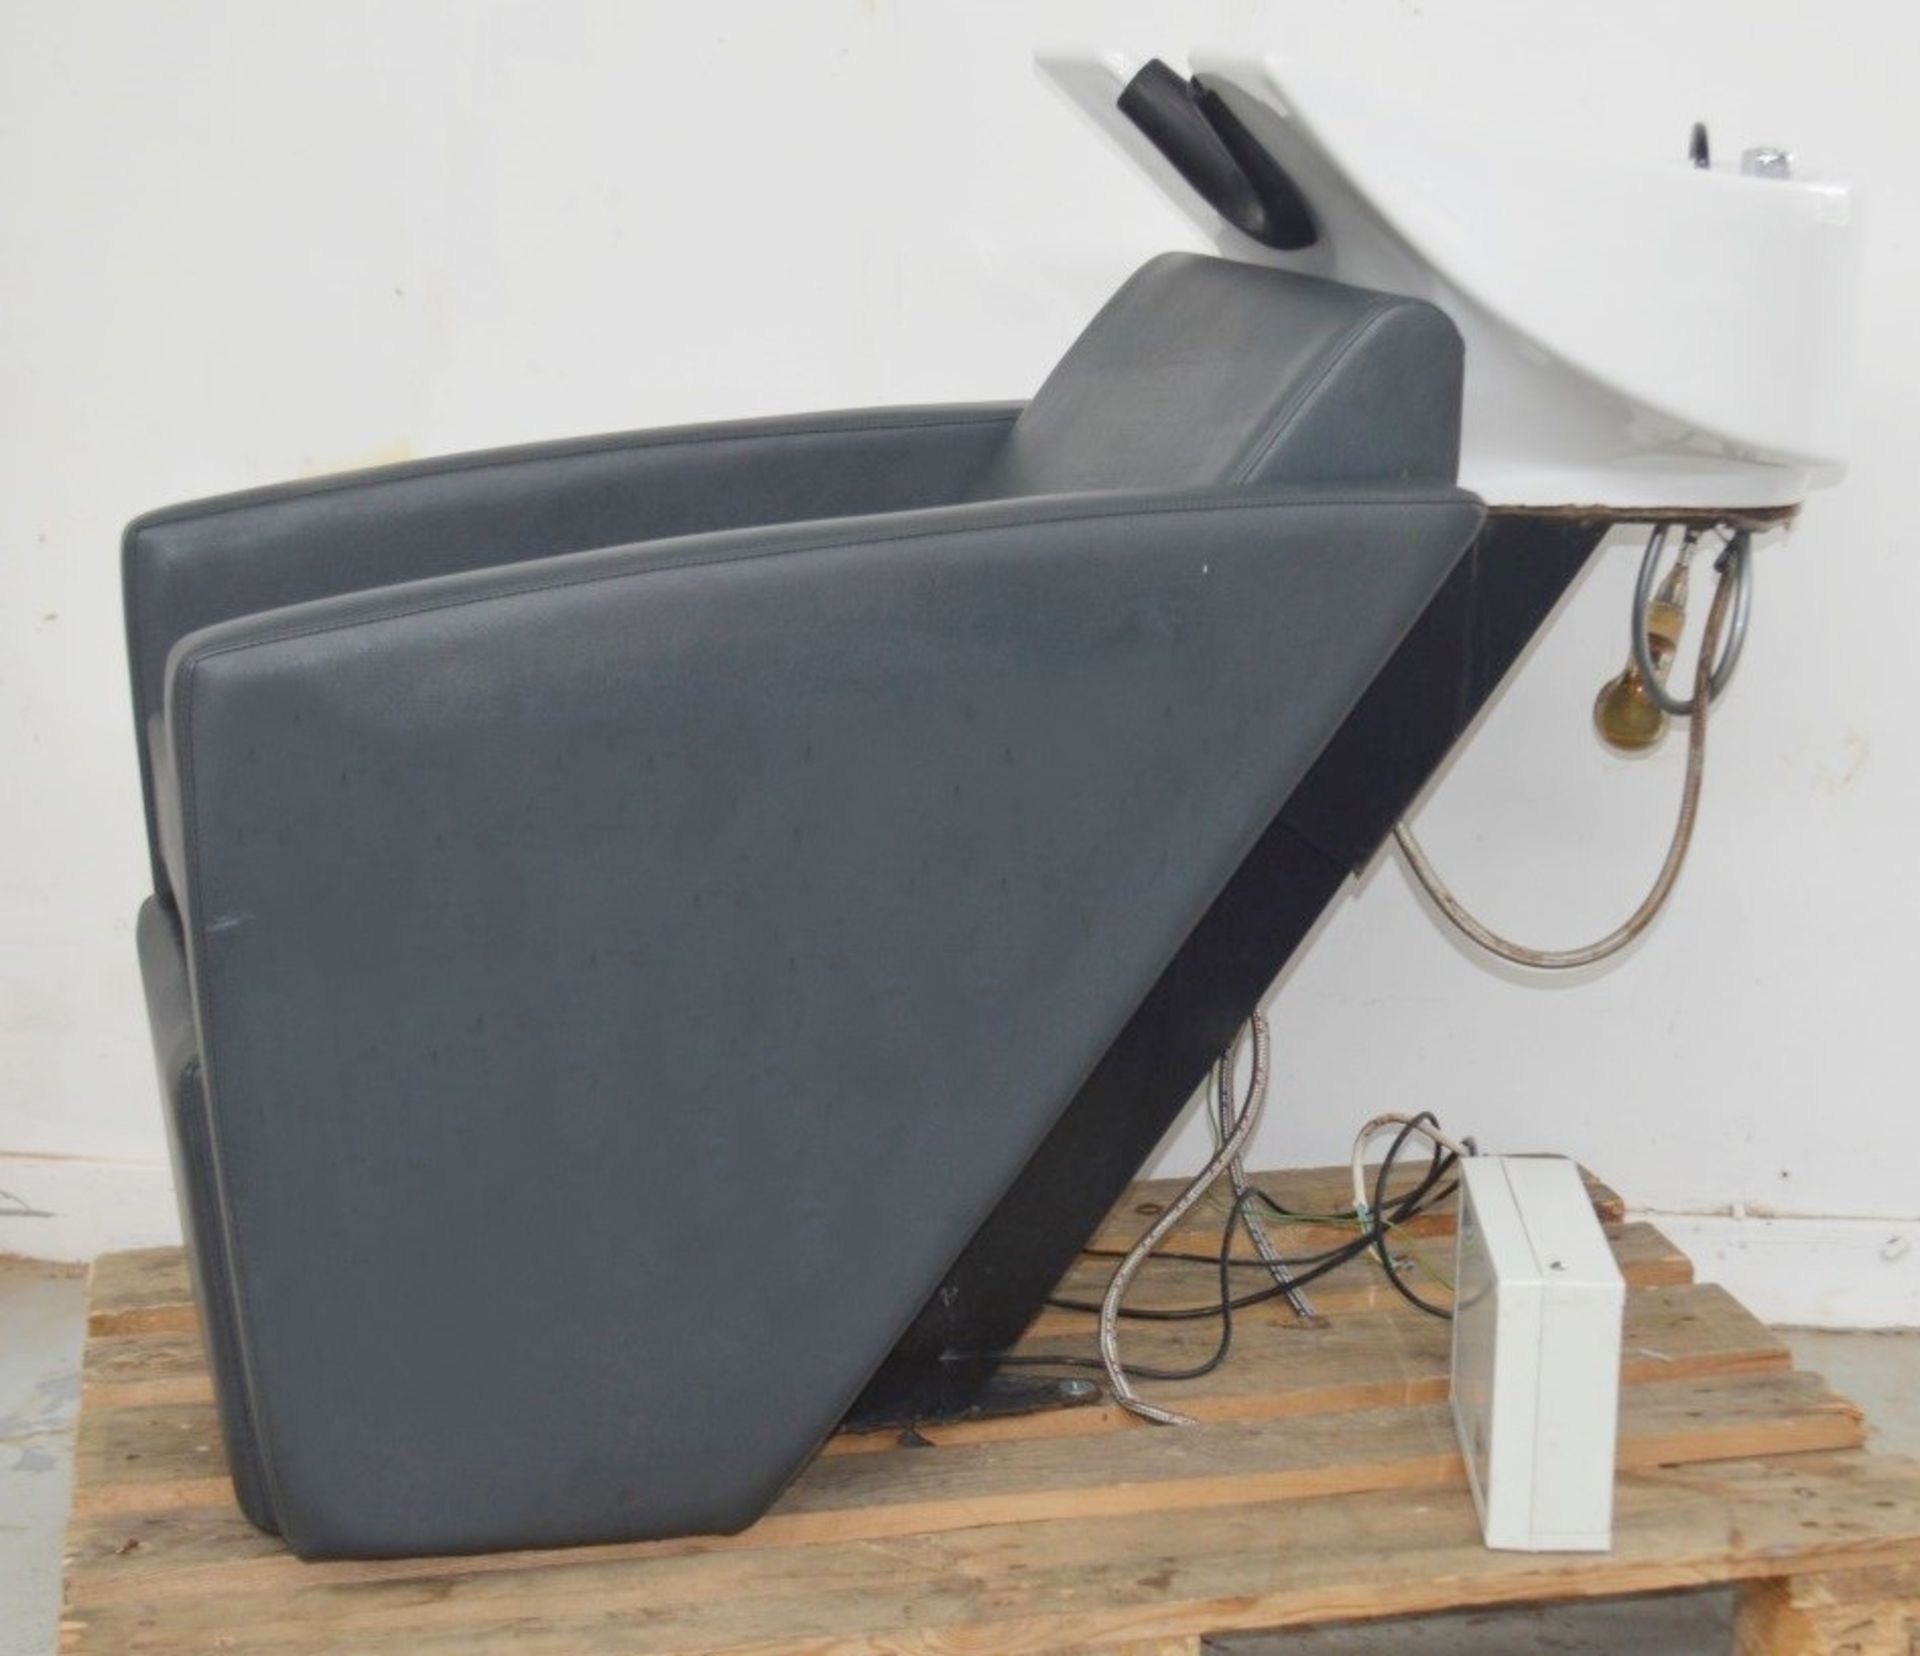 1 x Professional Reclining Hair Washing Chair With Basin Shower And Foot Rest - Image 7 of 19